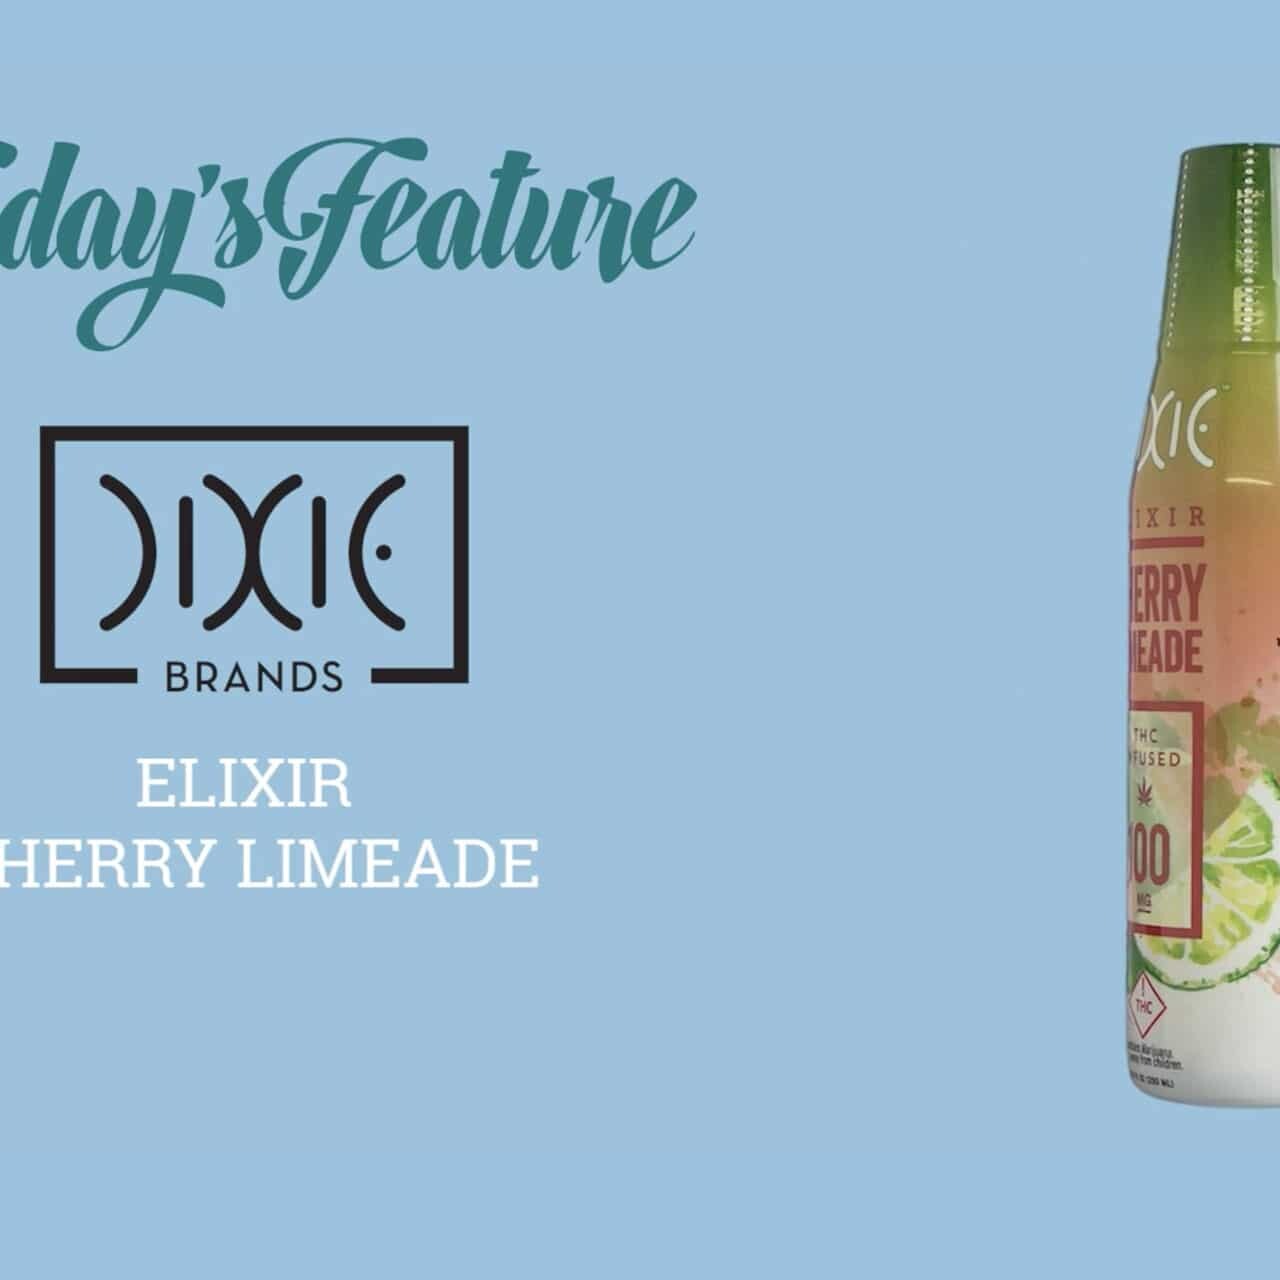 Dixie Cherry Limeade Review